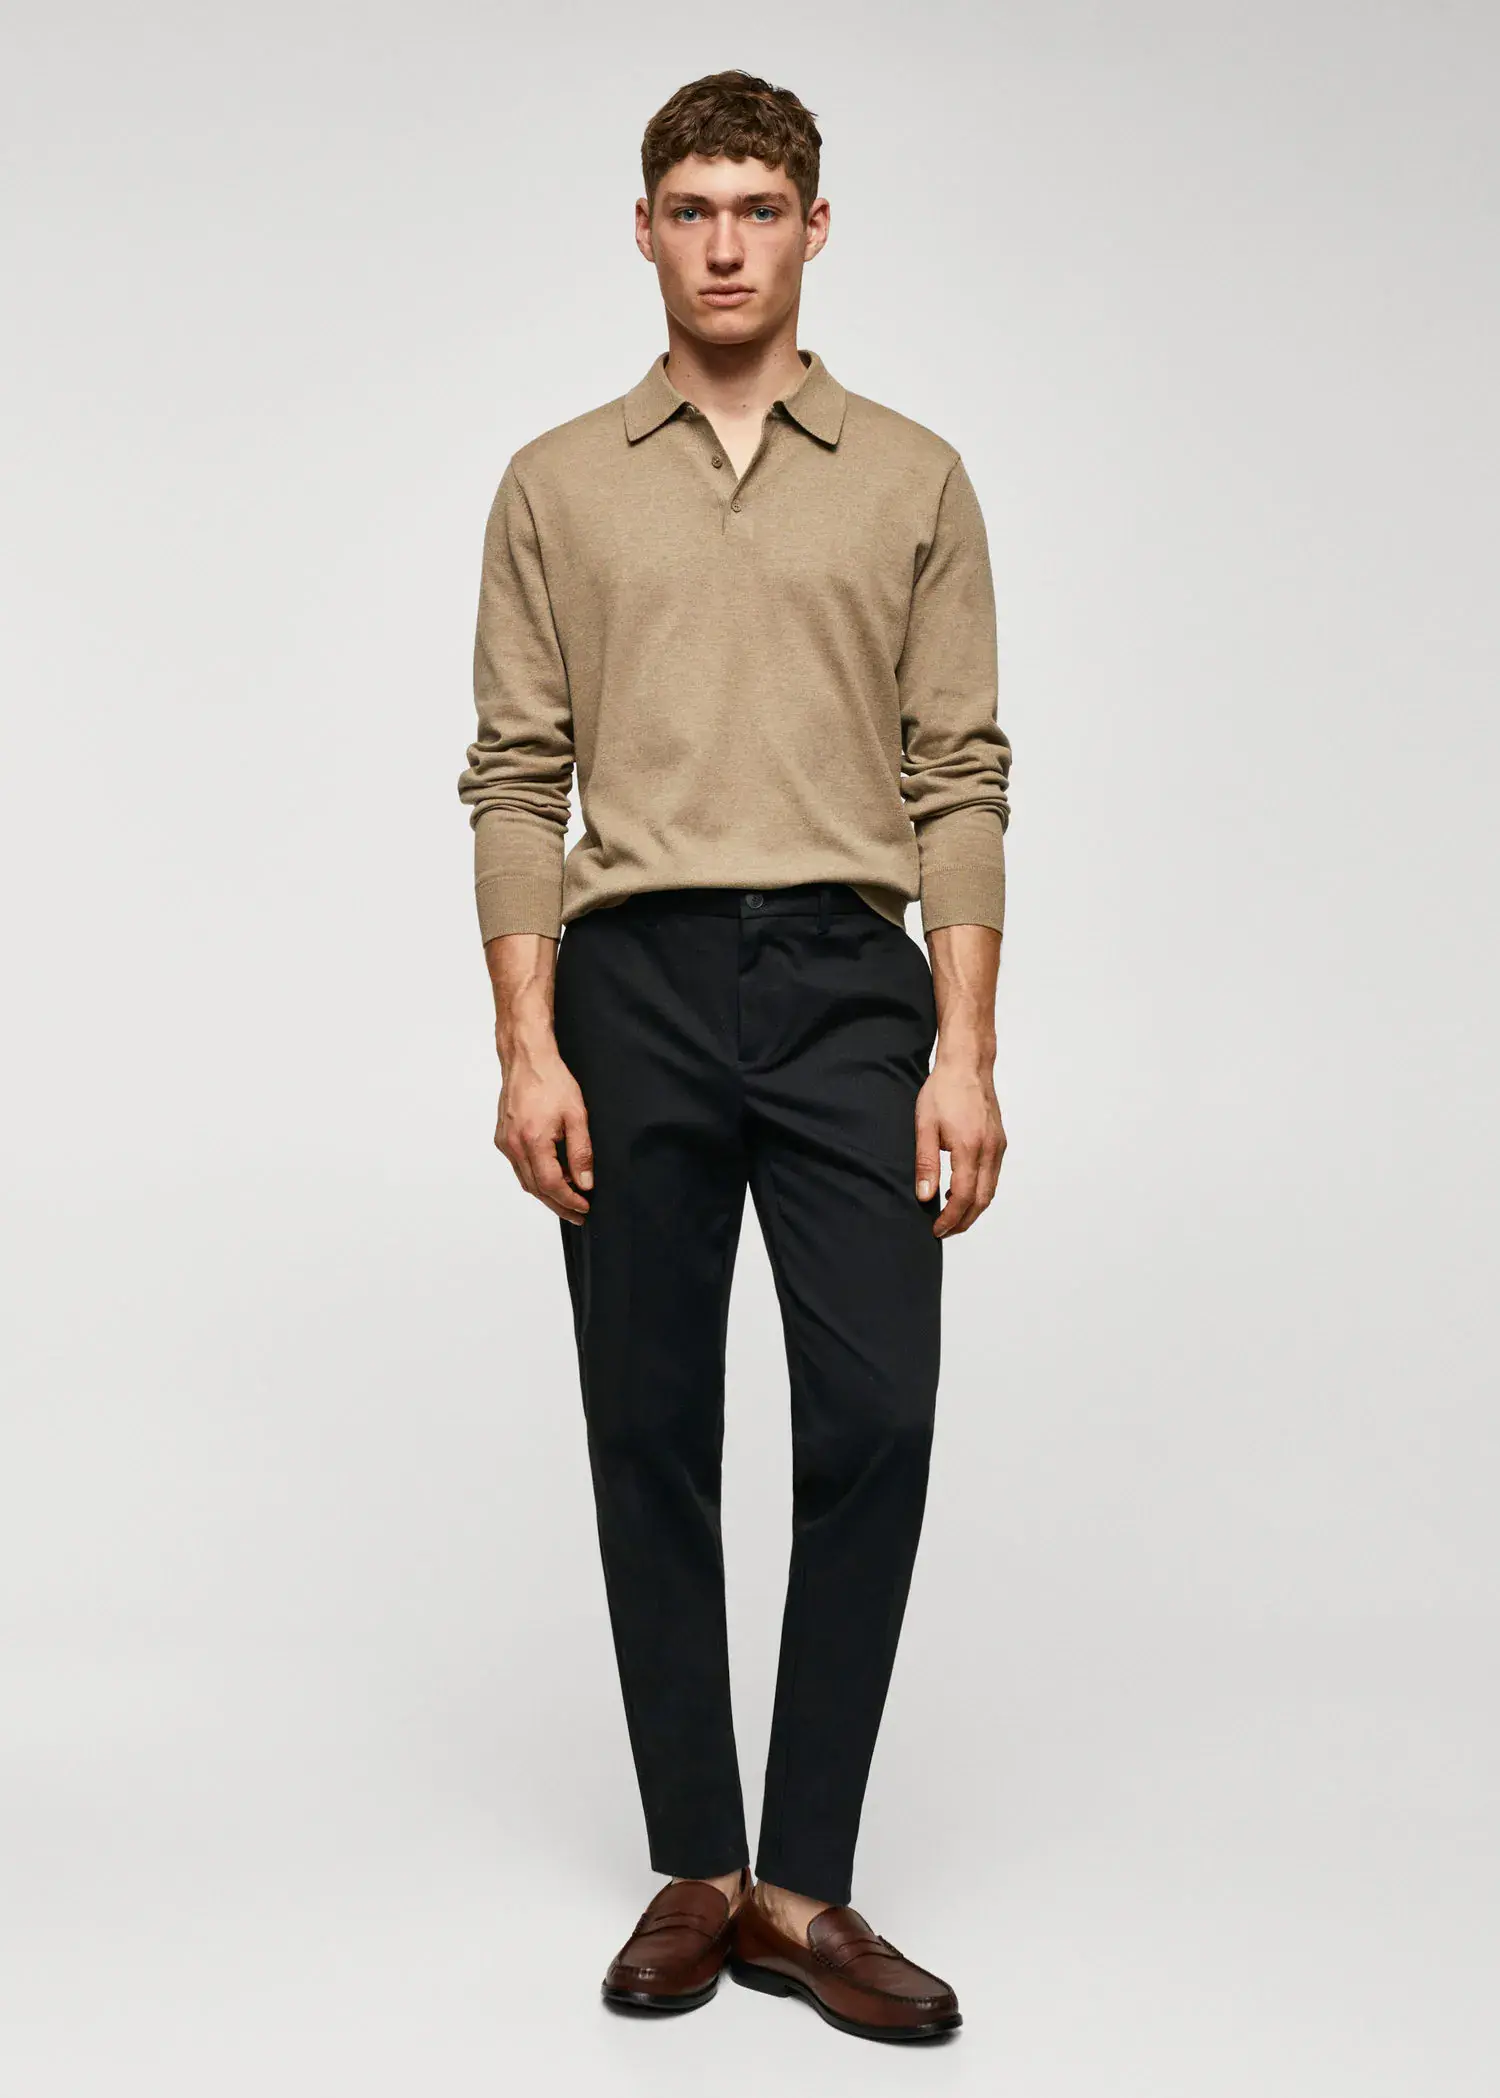 Mango Slim fit chino trousers. a man in a tan long sleeve shirt and black pants. 